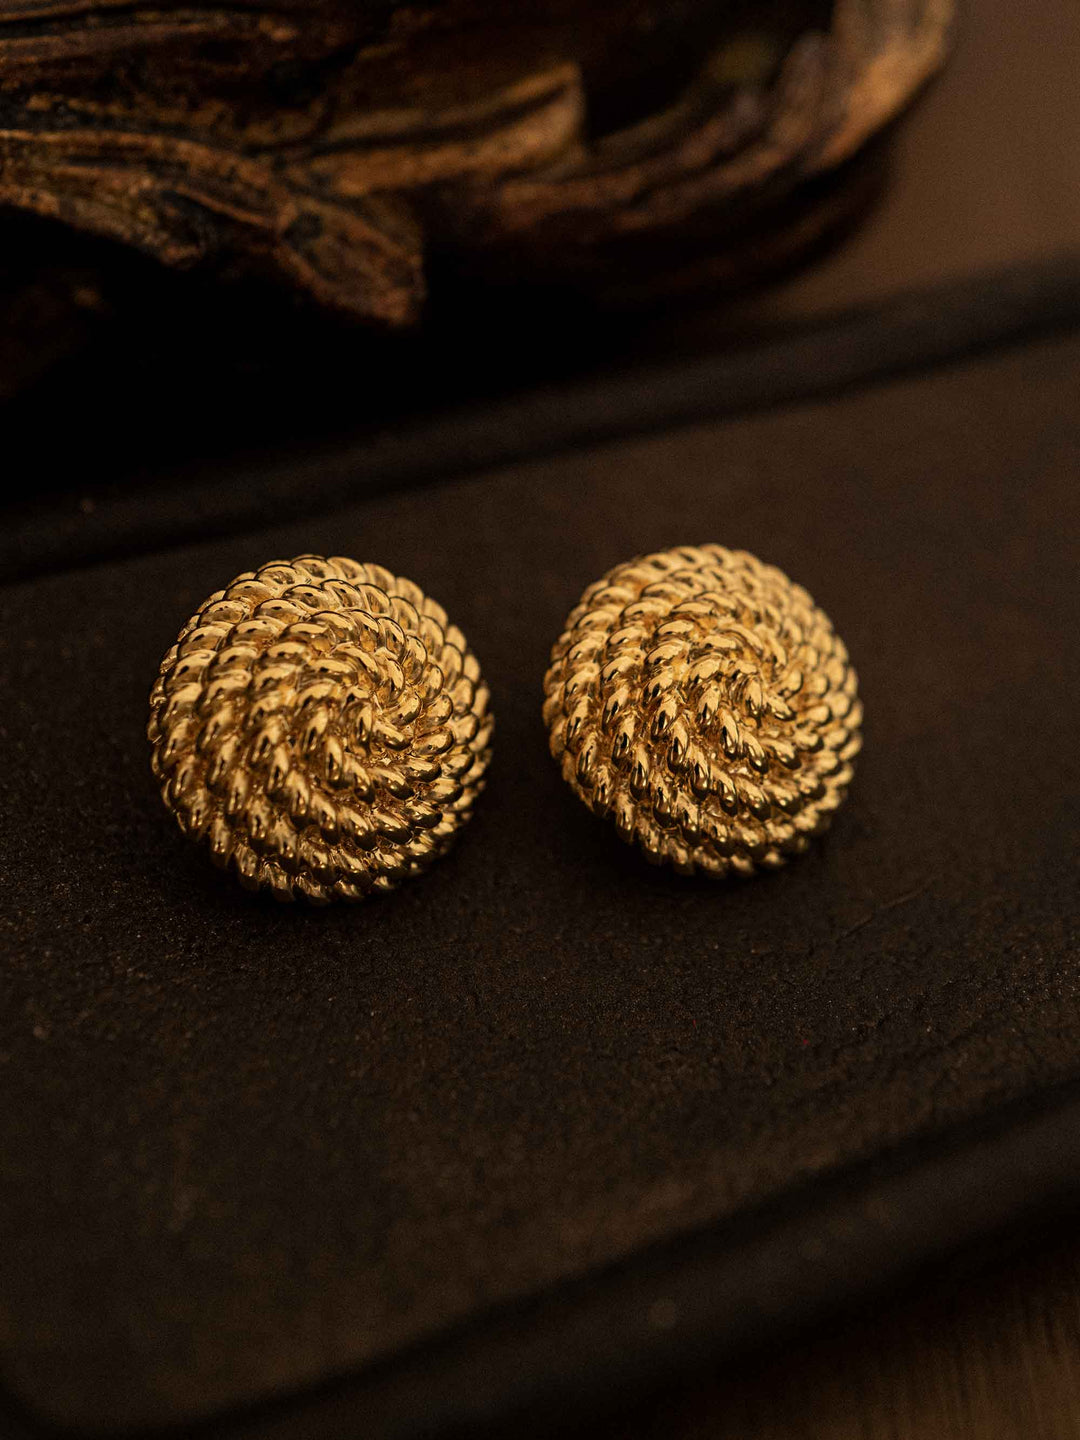 One gold-colored round earrings